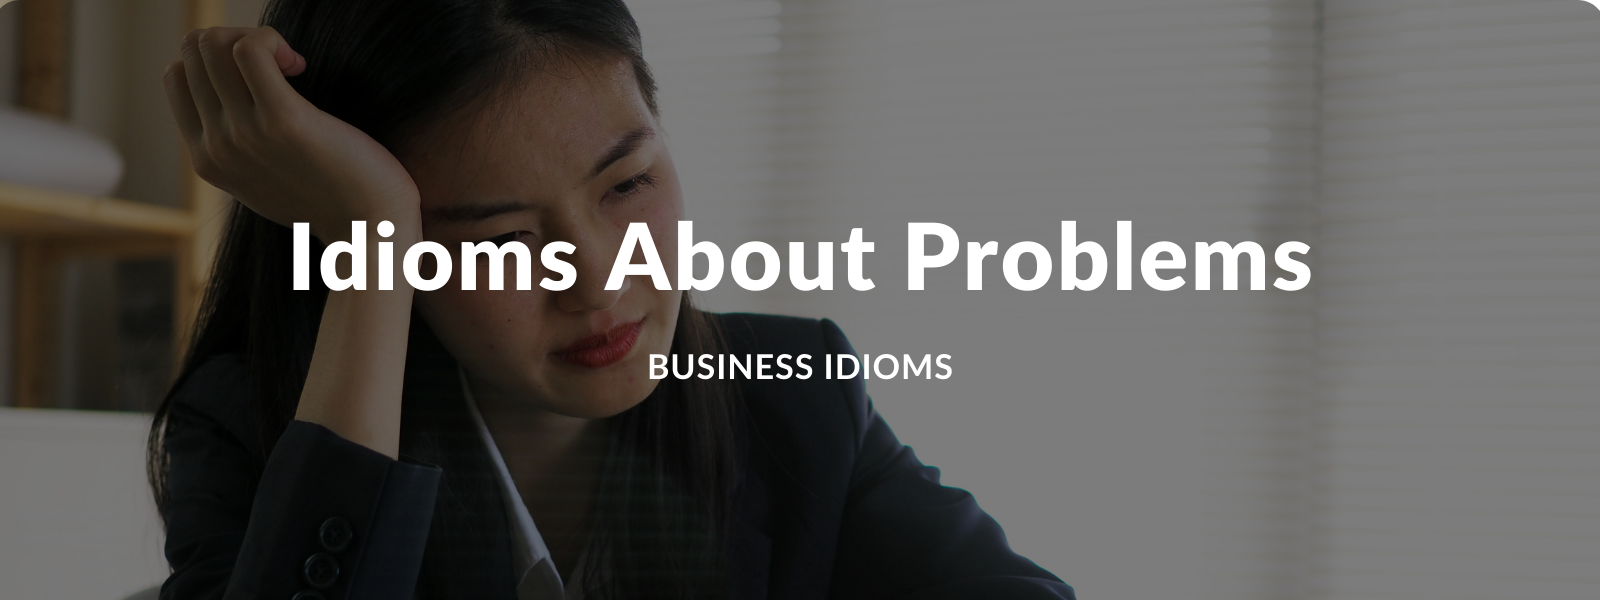 Idioms about problems - Talaera